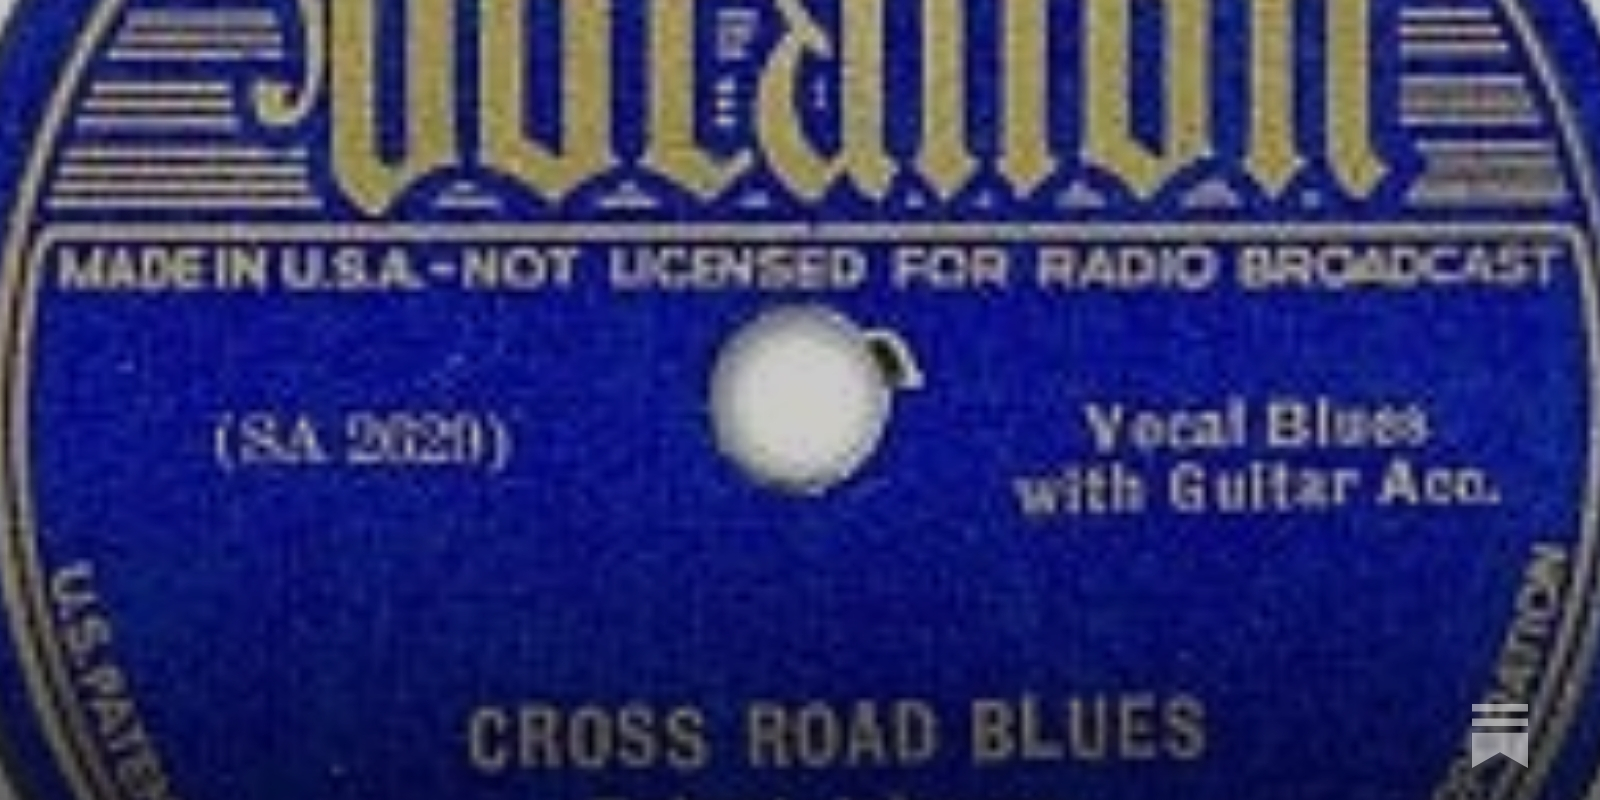 CROSS ROAD Blues – some stories